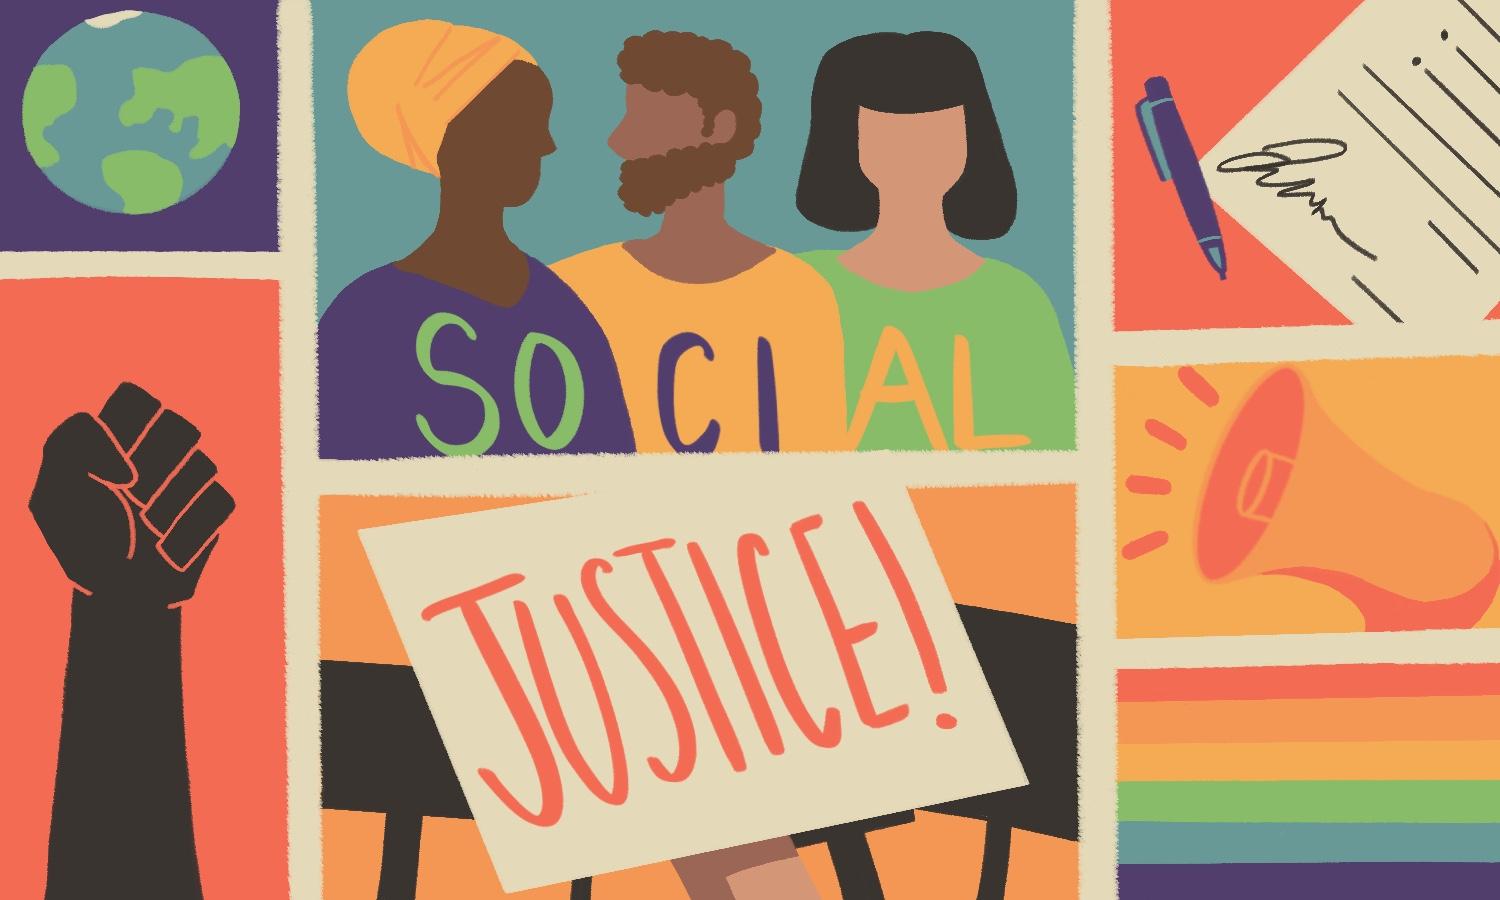 graphic illustration for social justice depicting different panels of social justice (picket lines, journalistic/policy change, megaphones, the BLM fist from Malcom X